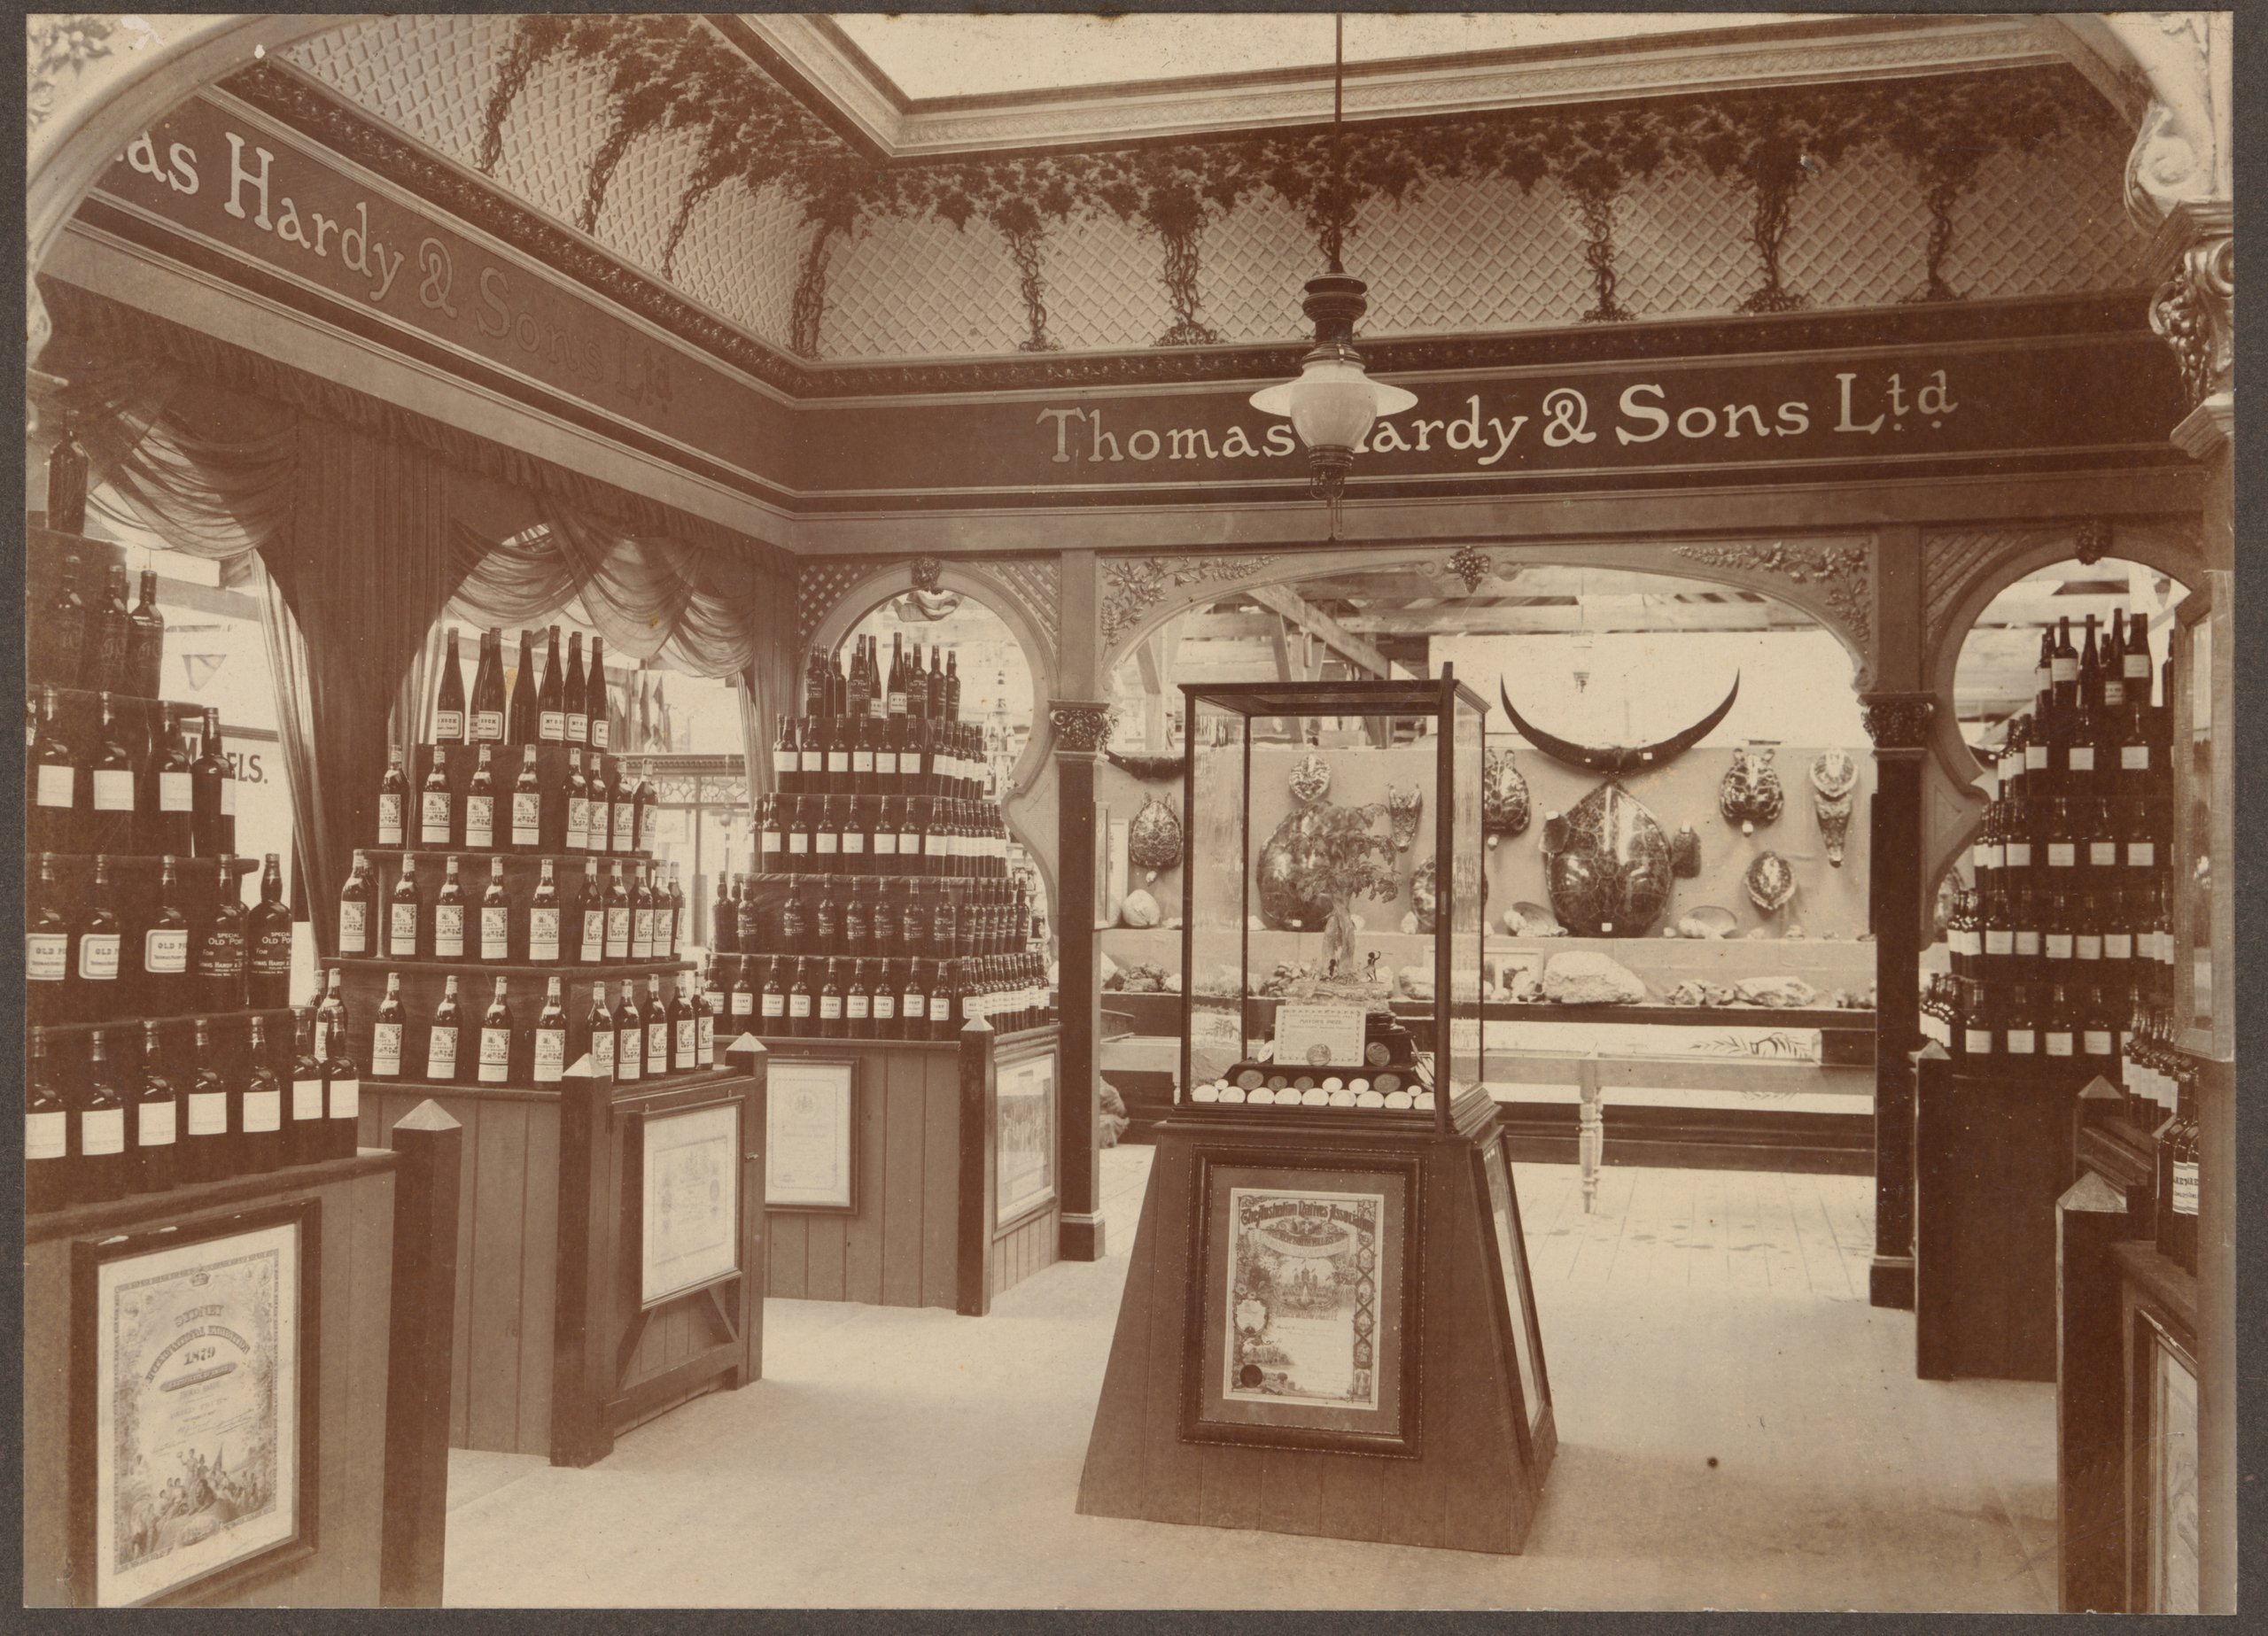 Photograph of promotional exhibit for Thomas Hardy & Sons Ltd